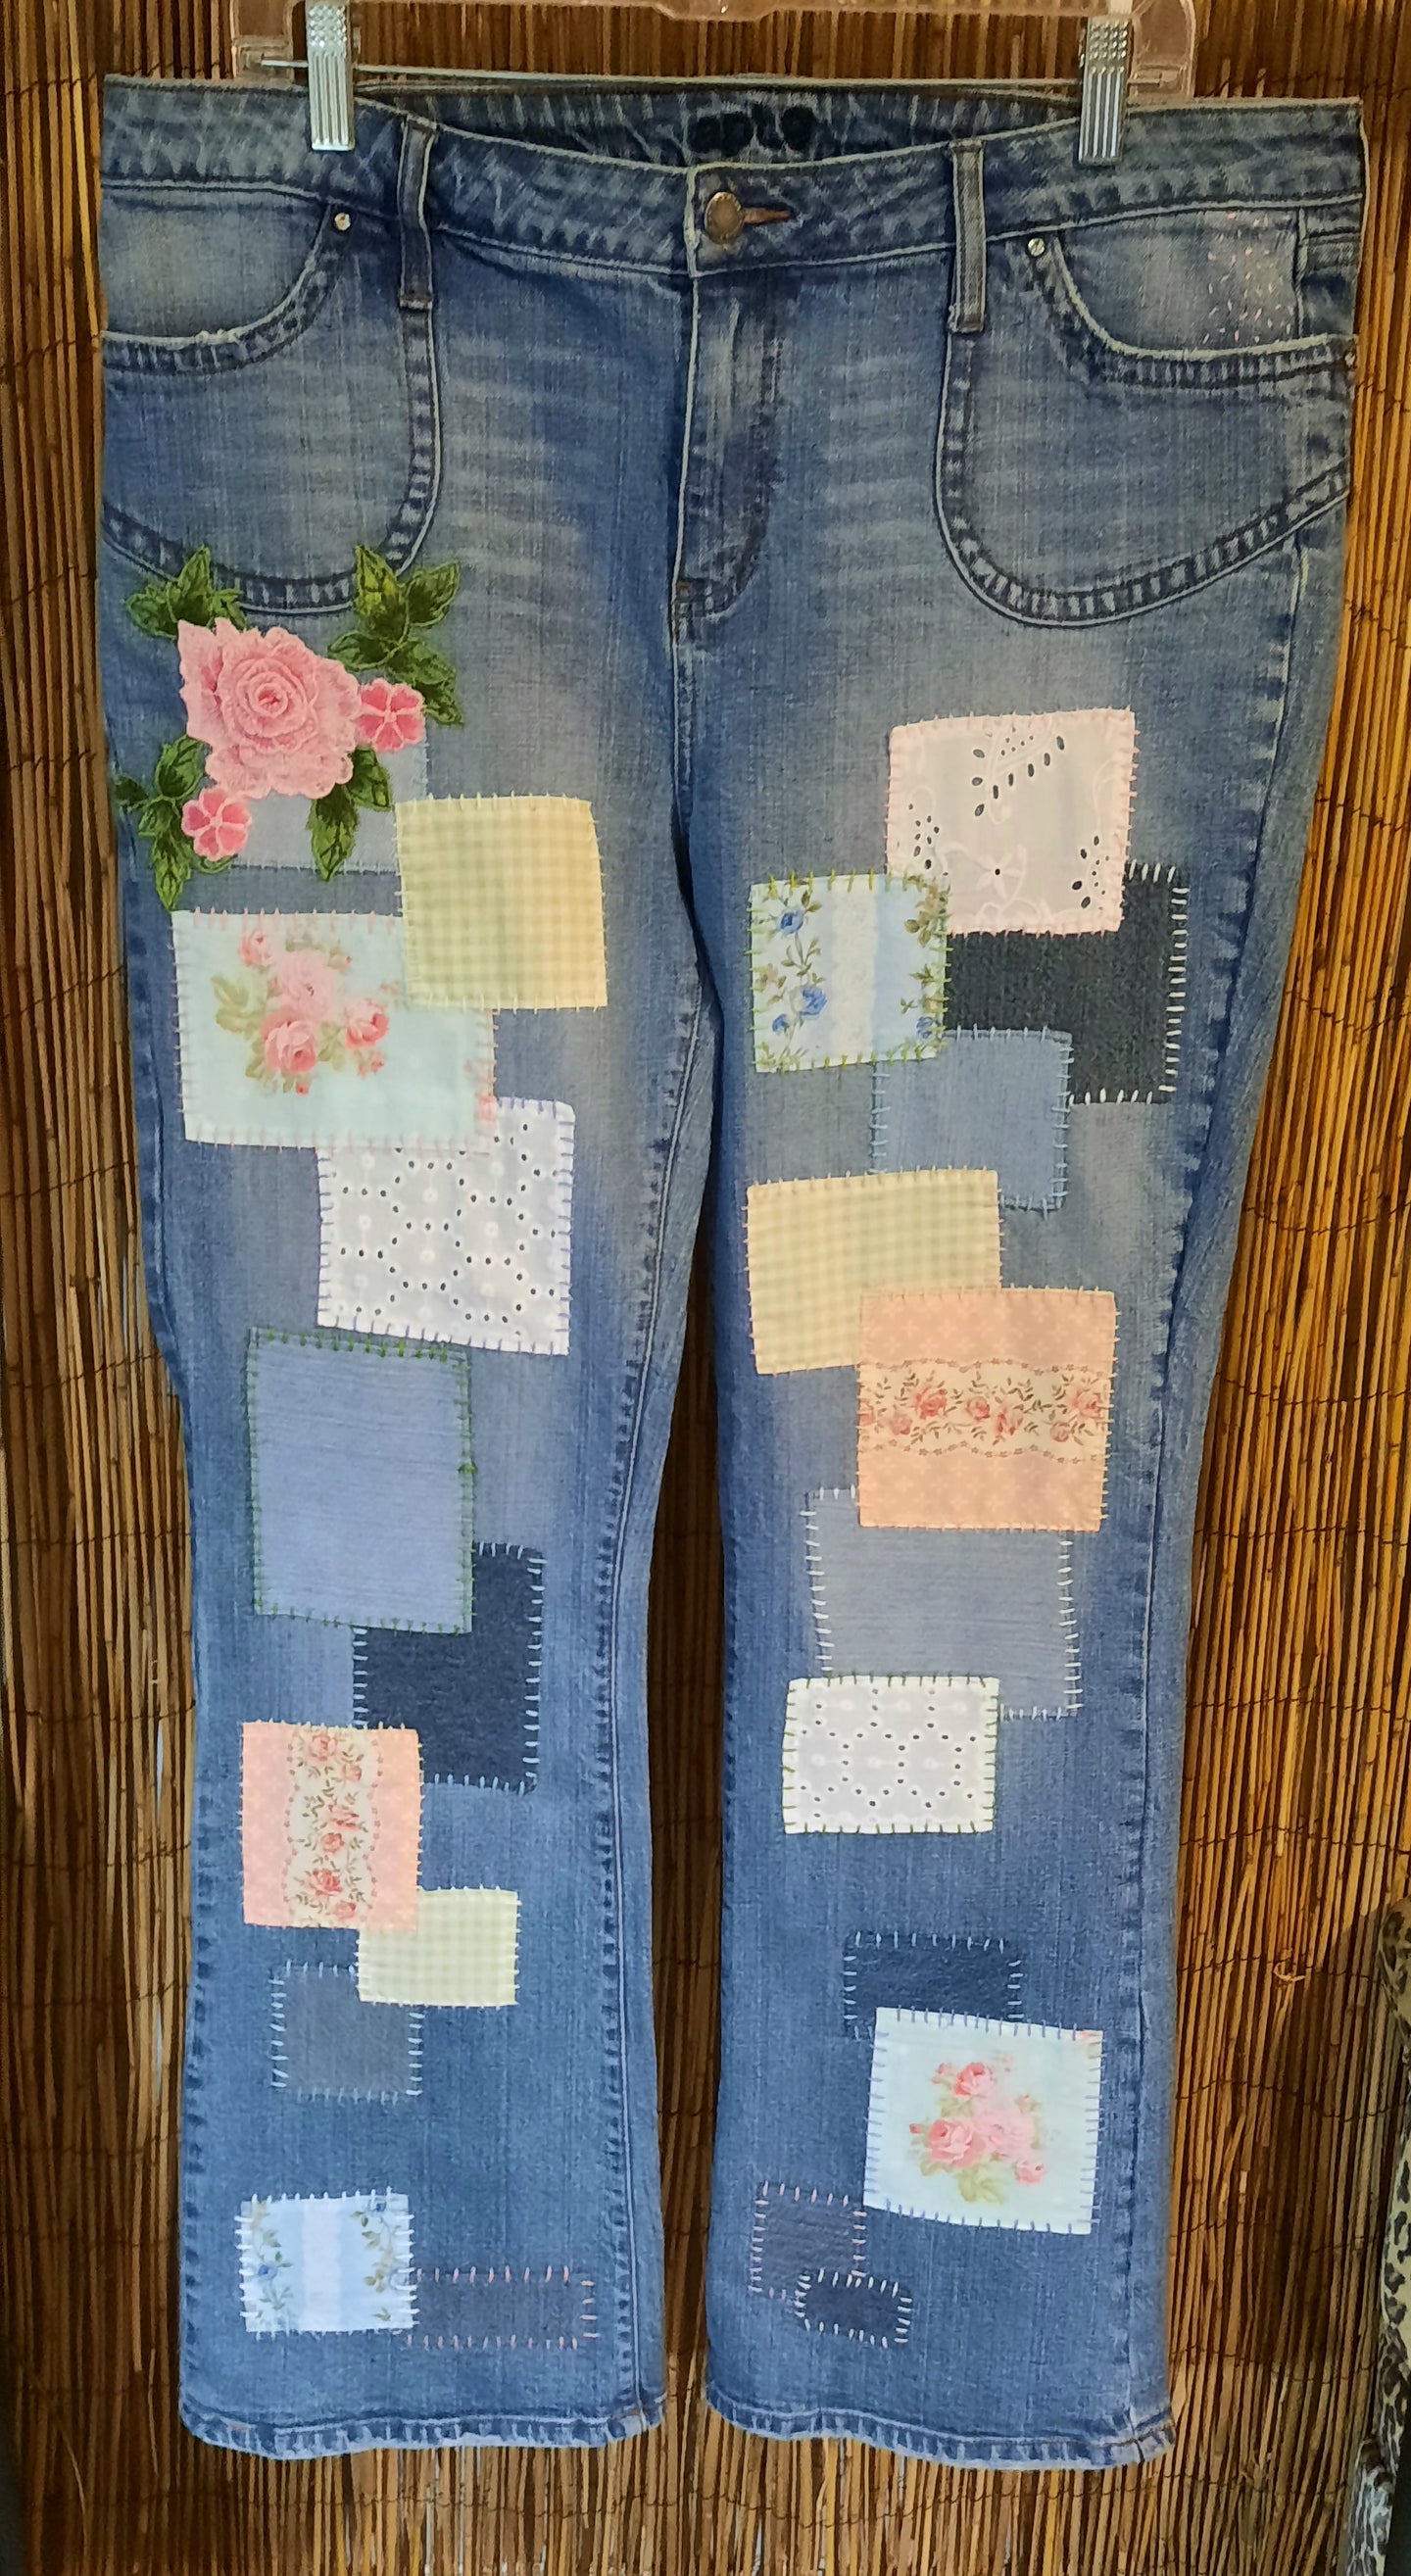 Upcycled Jeans/Repurposed Jeans/Shabby Chic/Boho